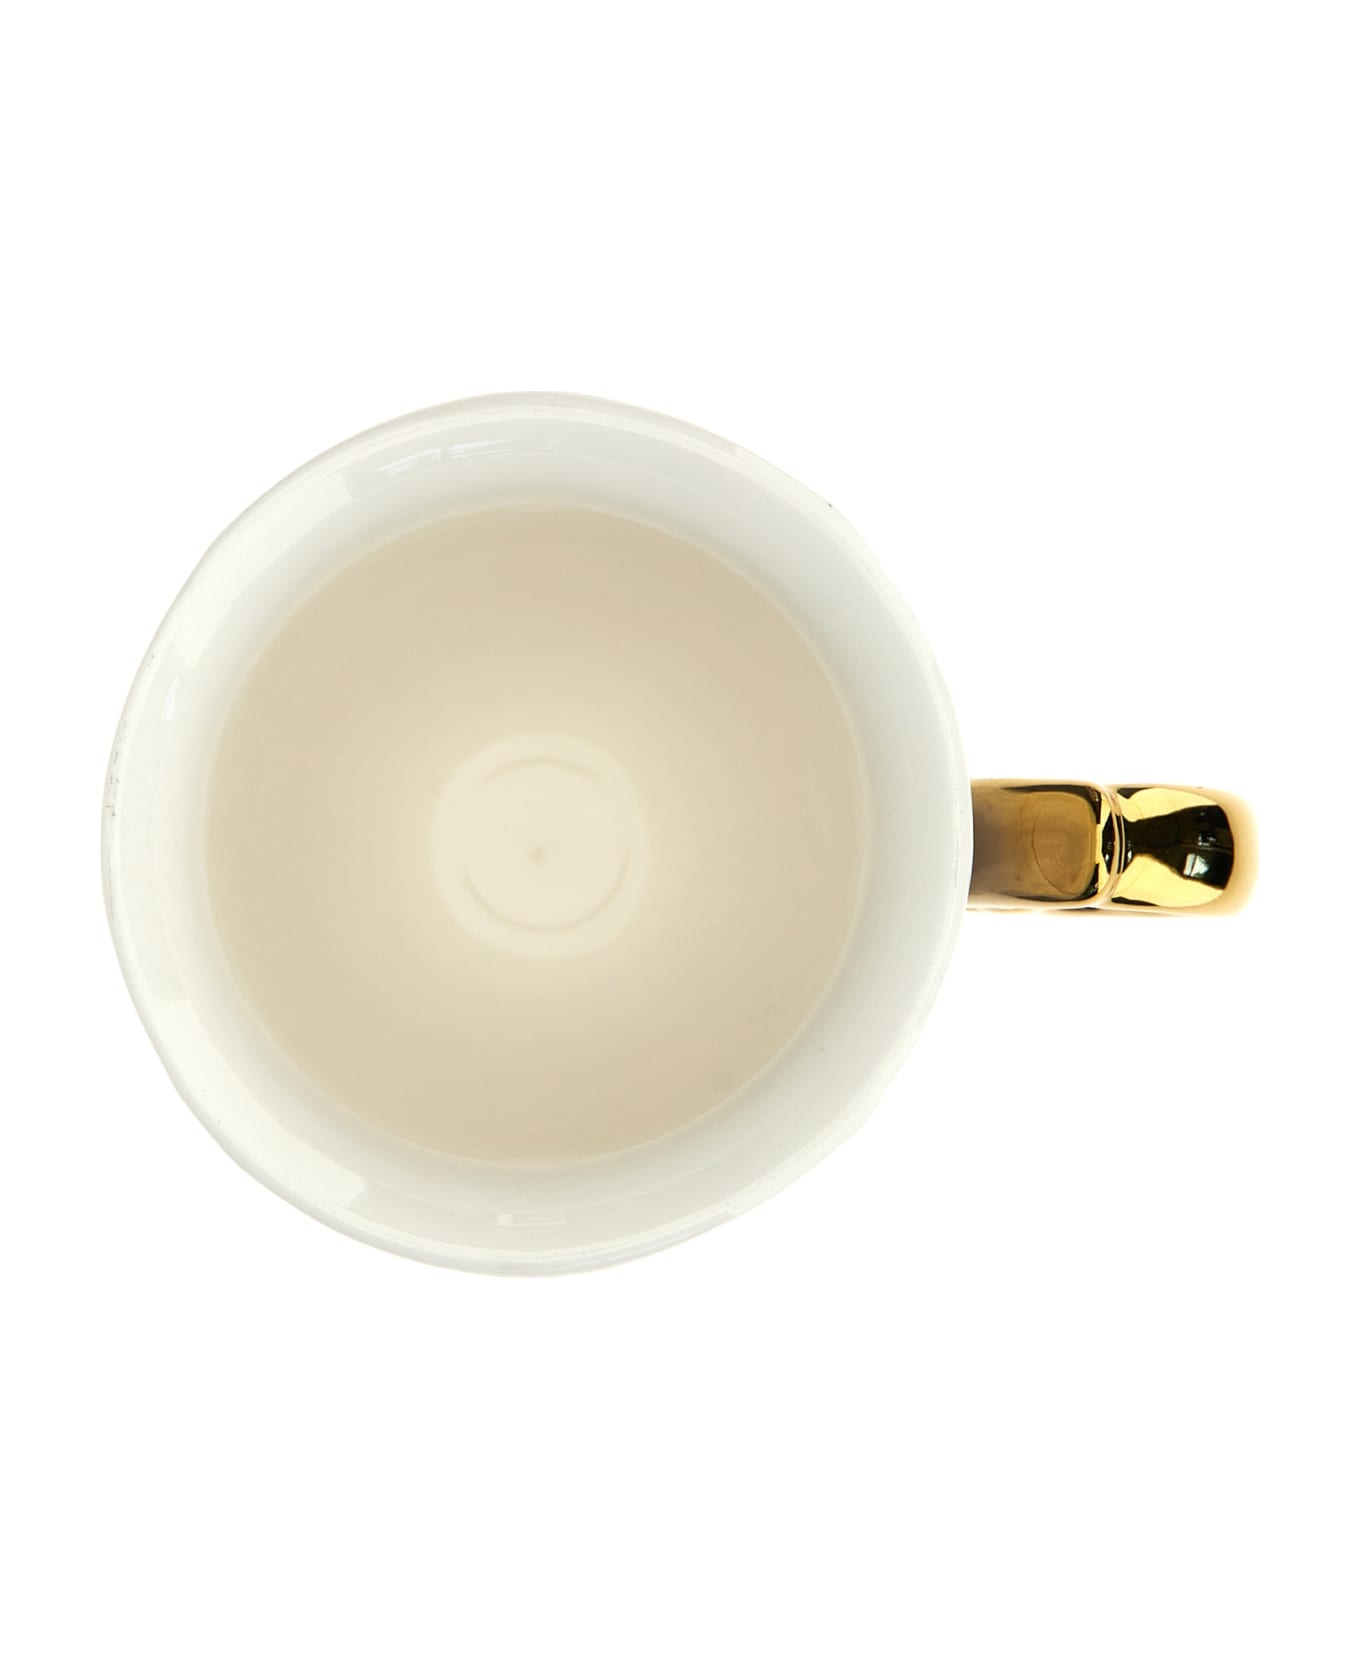 Seletti X Selab 'i-wares' Cup - Gold